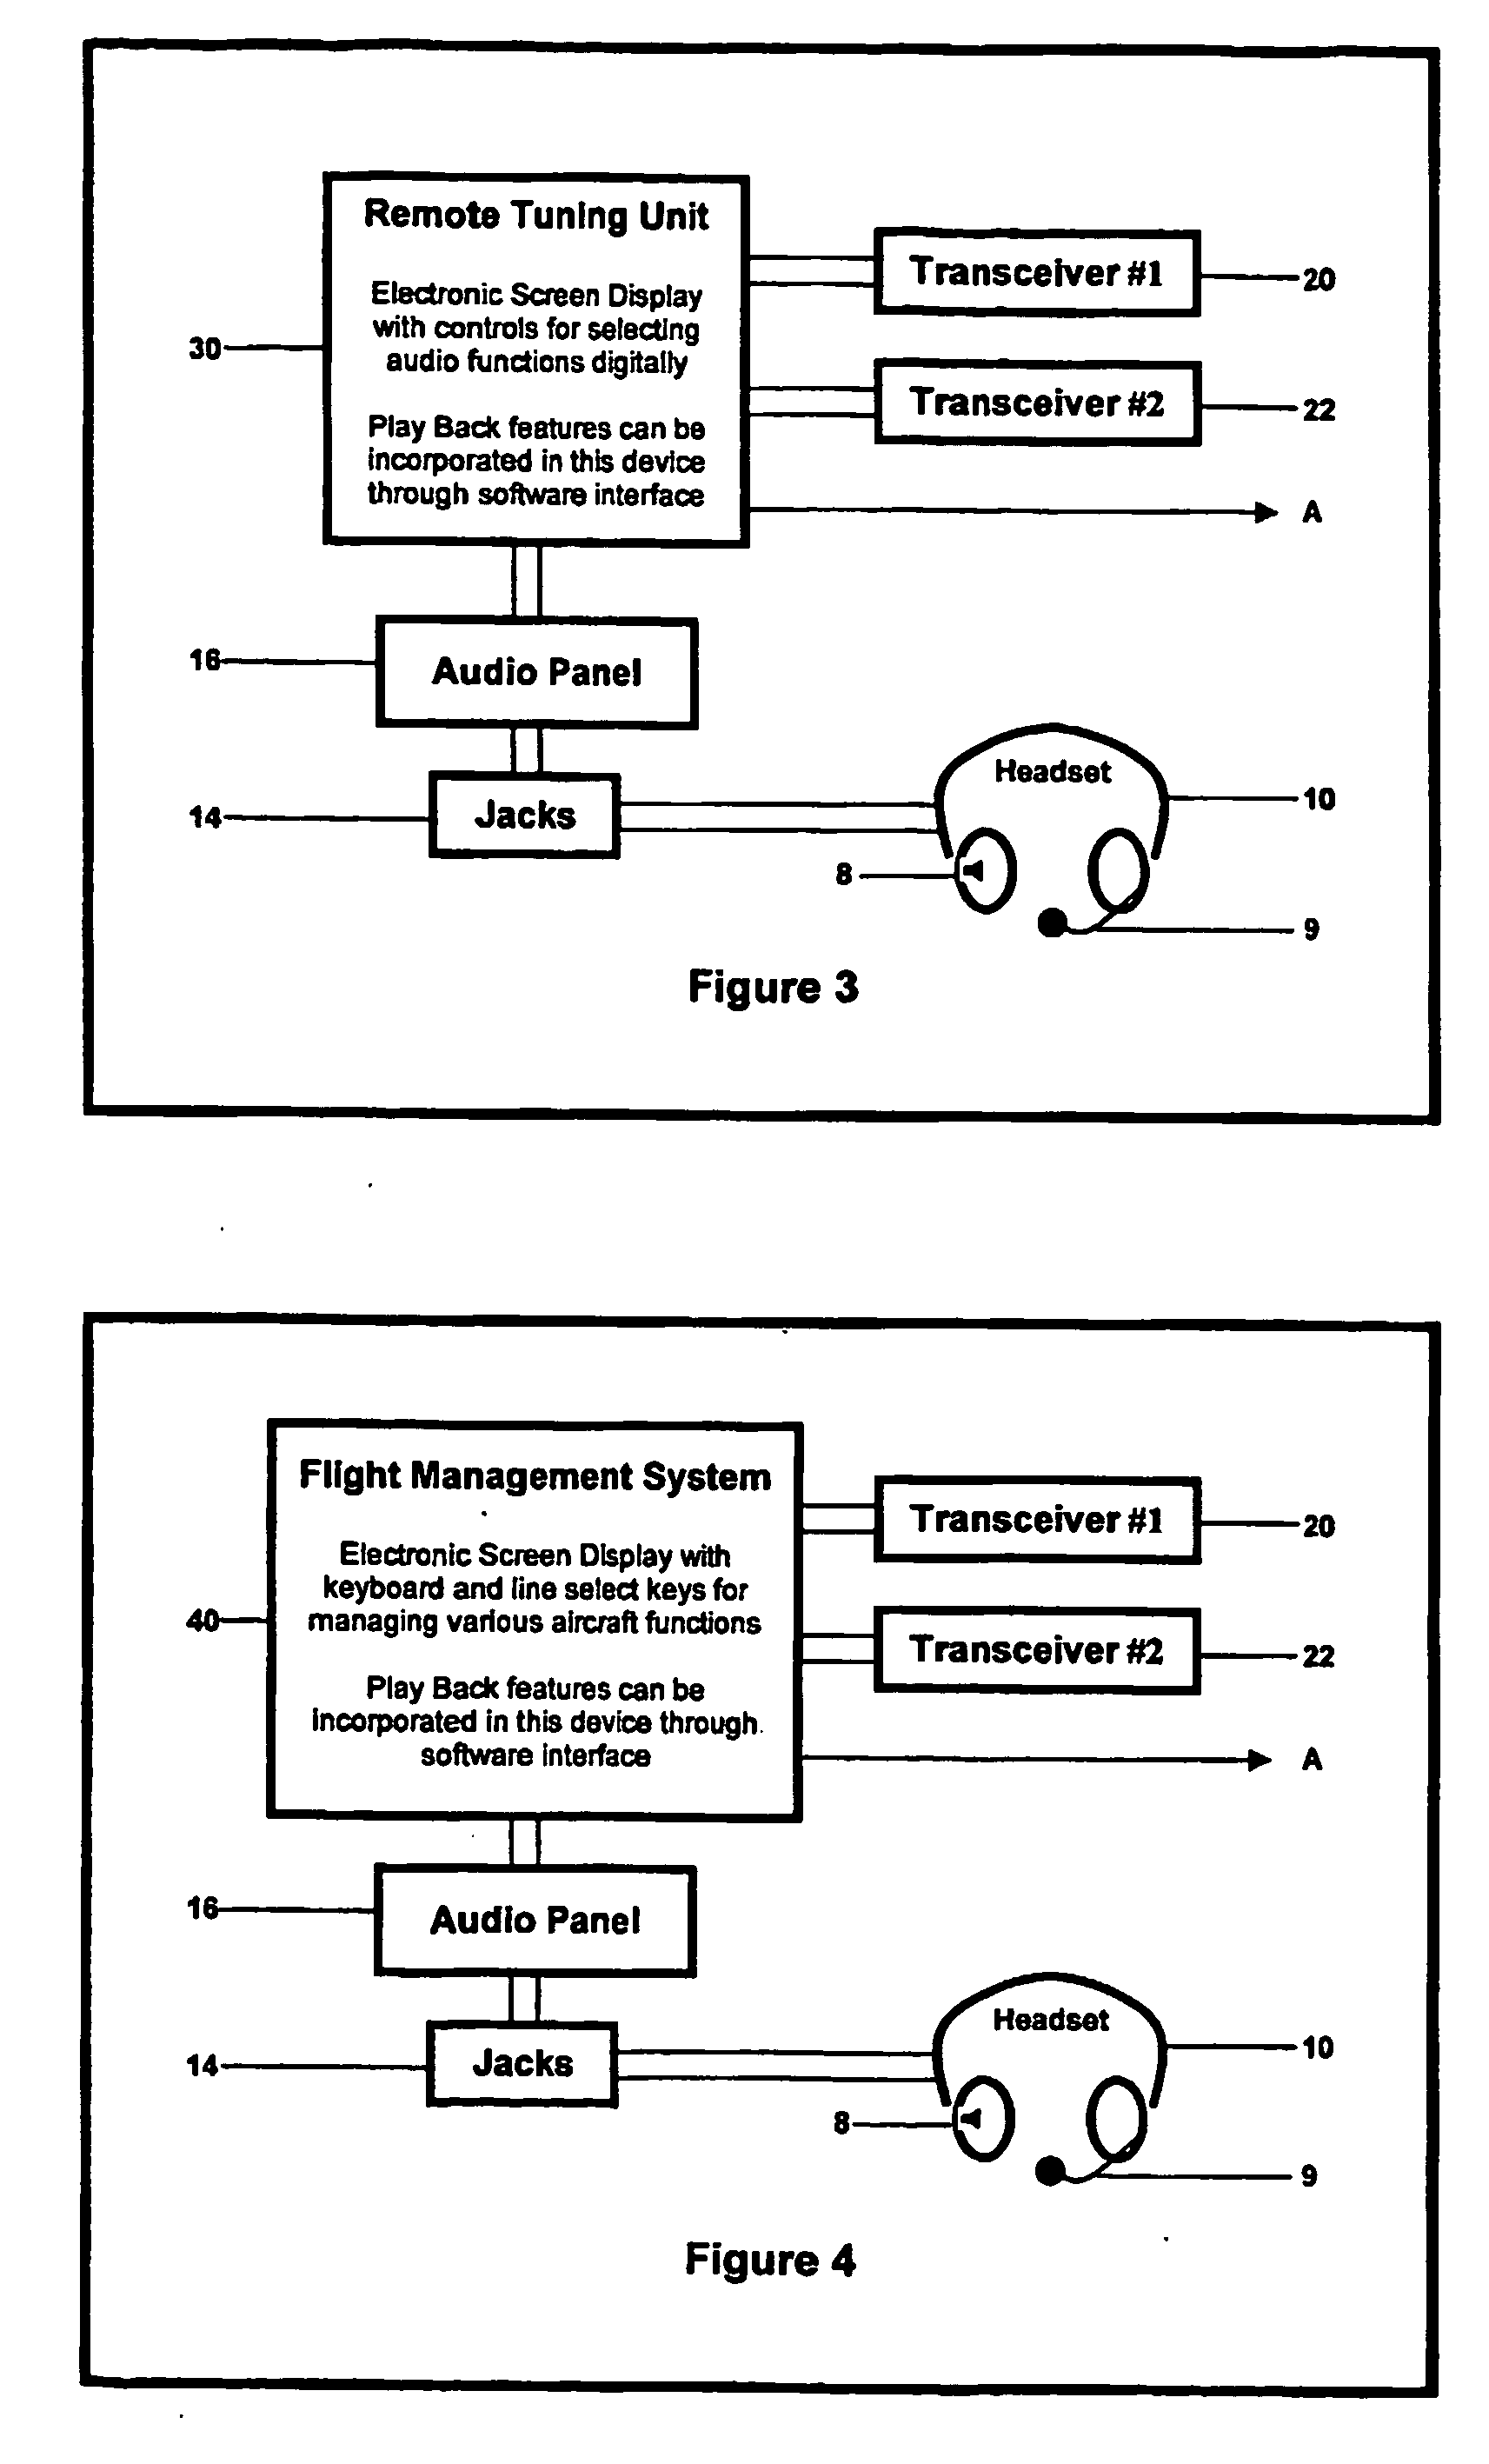 Recorded communication system for aircraft